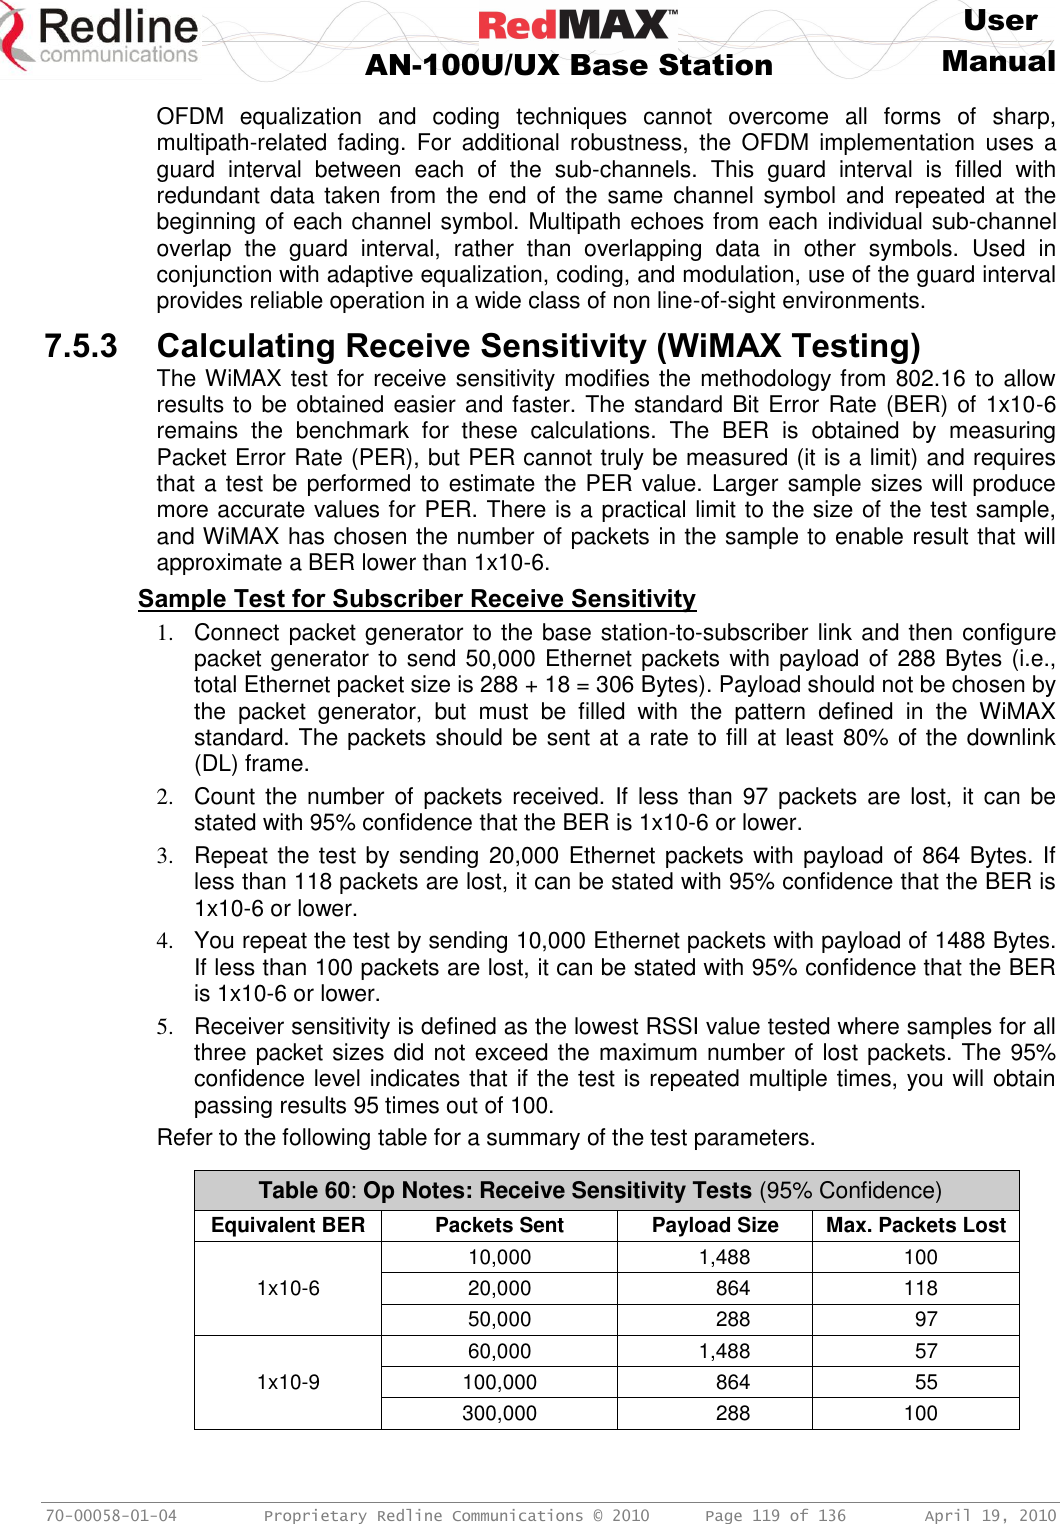     User  AN-100U/UX Base Station Manual   70-00058-01-04  Proprietary Redline Communications © 2010   Page 119 of 136  April 19, 2010 OFDM  equalization  and  coding  techniques  cannot  overcome  all  forms  of  sharp, multipath-related  fading.  For  additional robustness,  the  OFDM  implementation  uses a guard  interval  between  each  of  the  sub-channels.  This  guard  interval  is  filled  with redundant data  taken from  the  end  of  the  same channel  symbol  and  repeated  at  the beginning of each channel symbol. Multipath echoes from each individual sub-channel overlap  the  guard  interval,  rather  than  overlapping  data  in  other  symbols.  Used  in conjunction with adaptive equalization, coding, and modulation, use of the guard interval provides reliable operation in a wide class of non line-of-sight environments. 7.5.3 Calculating Receive Sensitivity (WiMAX Testing) The WiMAX test for receive sensitivity modifies the methodology from 802.16 to allow results to be obtained easier and faster. The standard Bit Error Rate (BER) of 1x10-6 remains  the  benchmark  for  these  calculations.  The  BER  is  obtained  by  measuring Packet Error Rate (PER), but PER cannot truly be measured (it is a limit) and requires that a test be performed to estimate the PER value. Larger sample sizes will produce more accurate values for PER. There is a practical limit to the size of the test sample, and WiMAX has chosen the number of packets in the sample to enable result that will approximate a BER lower than 1x10-6. Sample Test for Subscriber Receive Sensitivity 1.  Connect packet generator to the base station-to-subscriber link and then configure packet generator to send 50,000 Ethernet packets with payload of 288 Bytes (i.e., total Ethernet packet size is 288 + 18 = 306 Bytes). Payload should not be chosen by the  packet  generator,  but  must  be  filled  with  the  pattern  defined  in  the  WiMAX standard. The packets should be sent at a rate to fill at least 80% of the downlink (DL) frame. 2.  Count the  number of  packets received. If  less than  97  packets are  lost, it  can  be stated with 95% confidence that the BER is 1x10-6 or lower. 3.  Repeat the test by sending 20,000 Ethernet packets with payload of 864 Bytes. If less than 118 packets are lost, it can be stated with 95% confidence that the BER is 1x10-6 or lower. 4.  You repeat the test by sending 10,000 Ethernet packets with payload of 1488 Bytes. If less than 100 packets are lost, it can be stated with 95% confidence that the BER is 1x10-6 or lower. 5.  Receiver sensitivity is defined as the lowest RSSI value tested where samples for all three packet sizes did not exceed the maximum number of lost packets. The 95% confidence level indicates that if the test is repeated multiple times, you will obtain passing results 95 times out of 100. Refer to the following table for a summary of the test parameters.  Table 60: Op Notes: Receive Sensitivity Tests (95% Confidence) Equivalent BER Packets Sent Payload Size Max. Packets Lost  10,000 1,488 100 1x10-6 20,000 864 118  50,000 288 97  60,000 1,488 57 1x10-9 100,000 864 55  300,000 288 100  